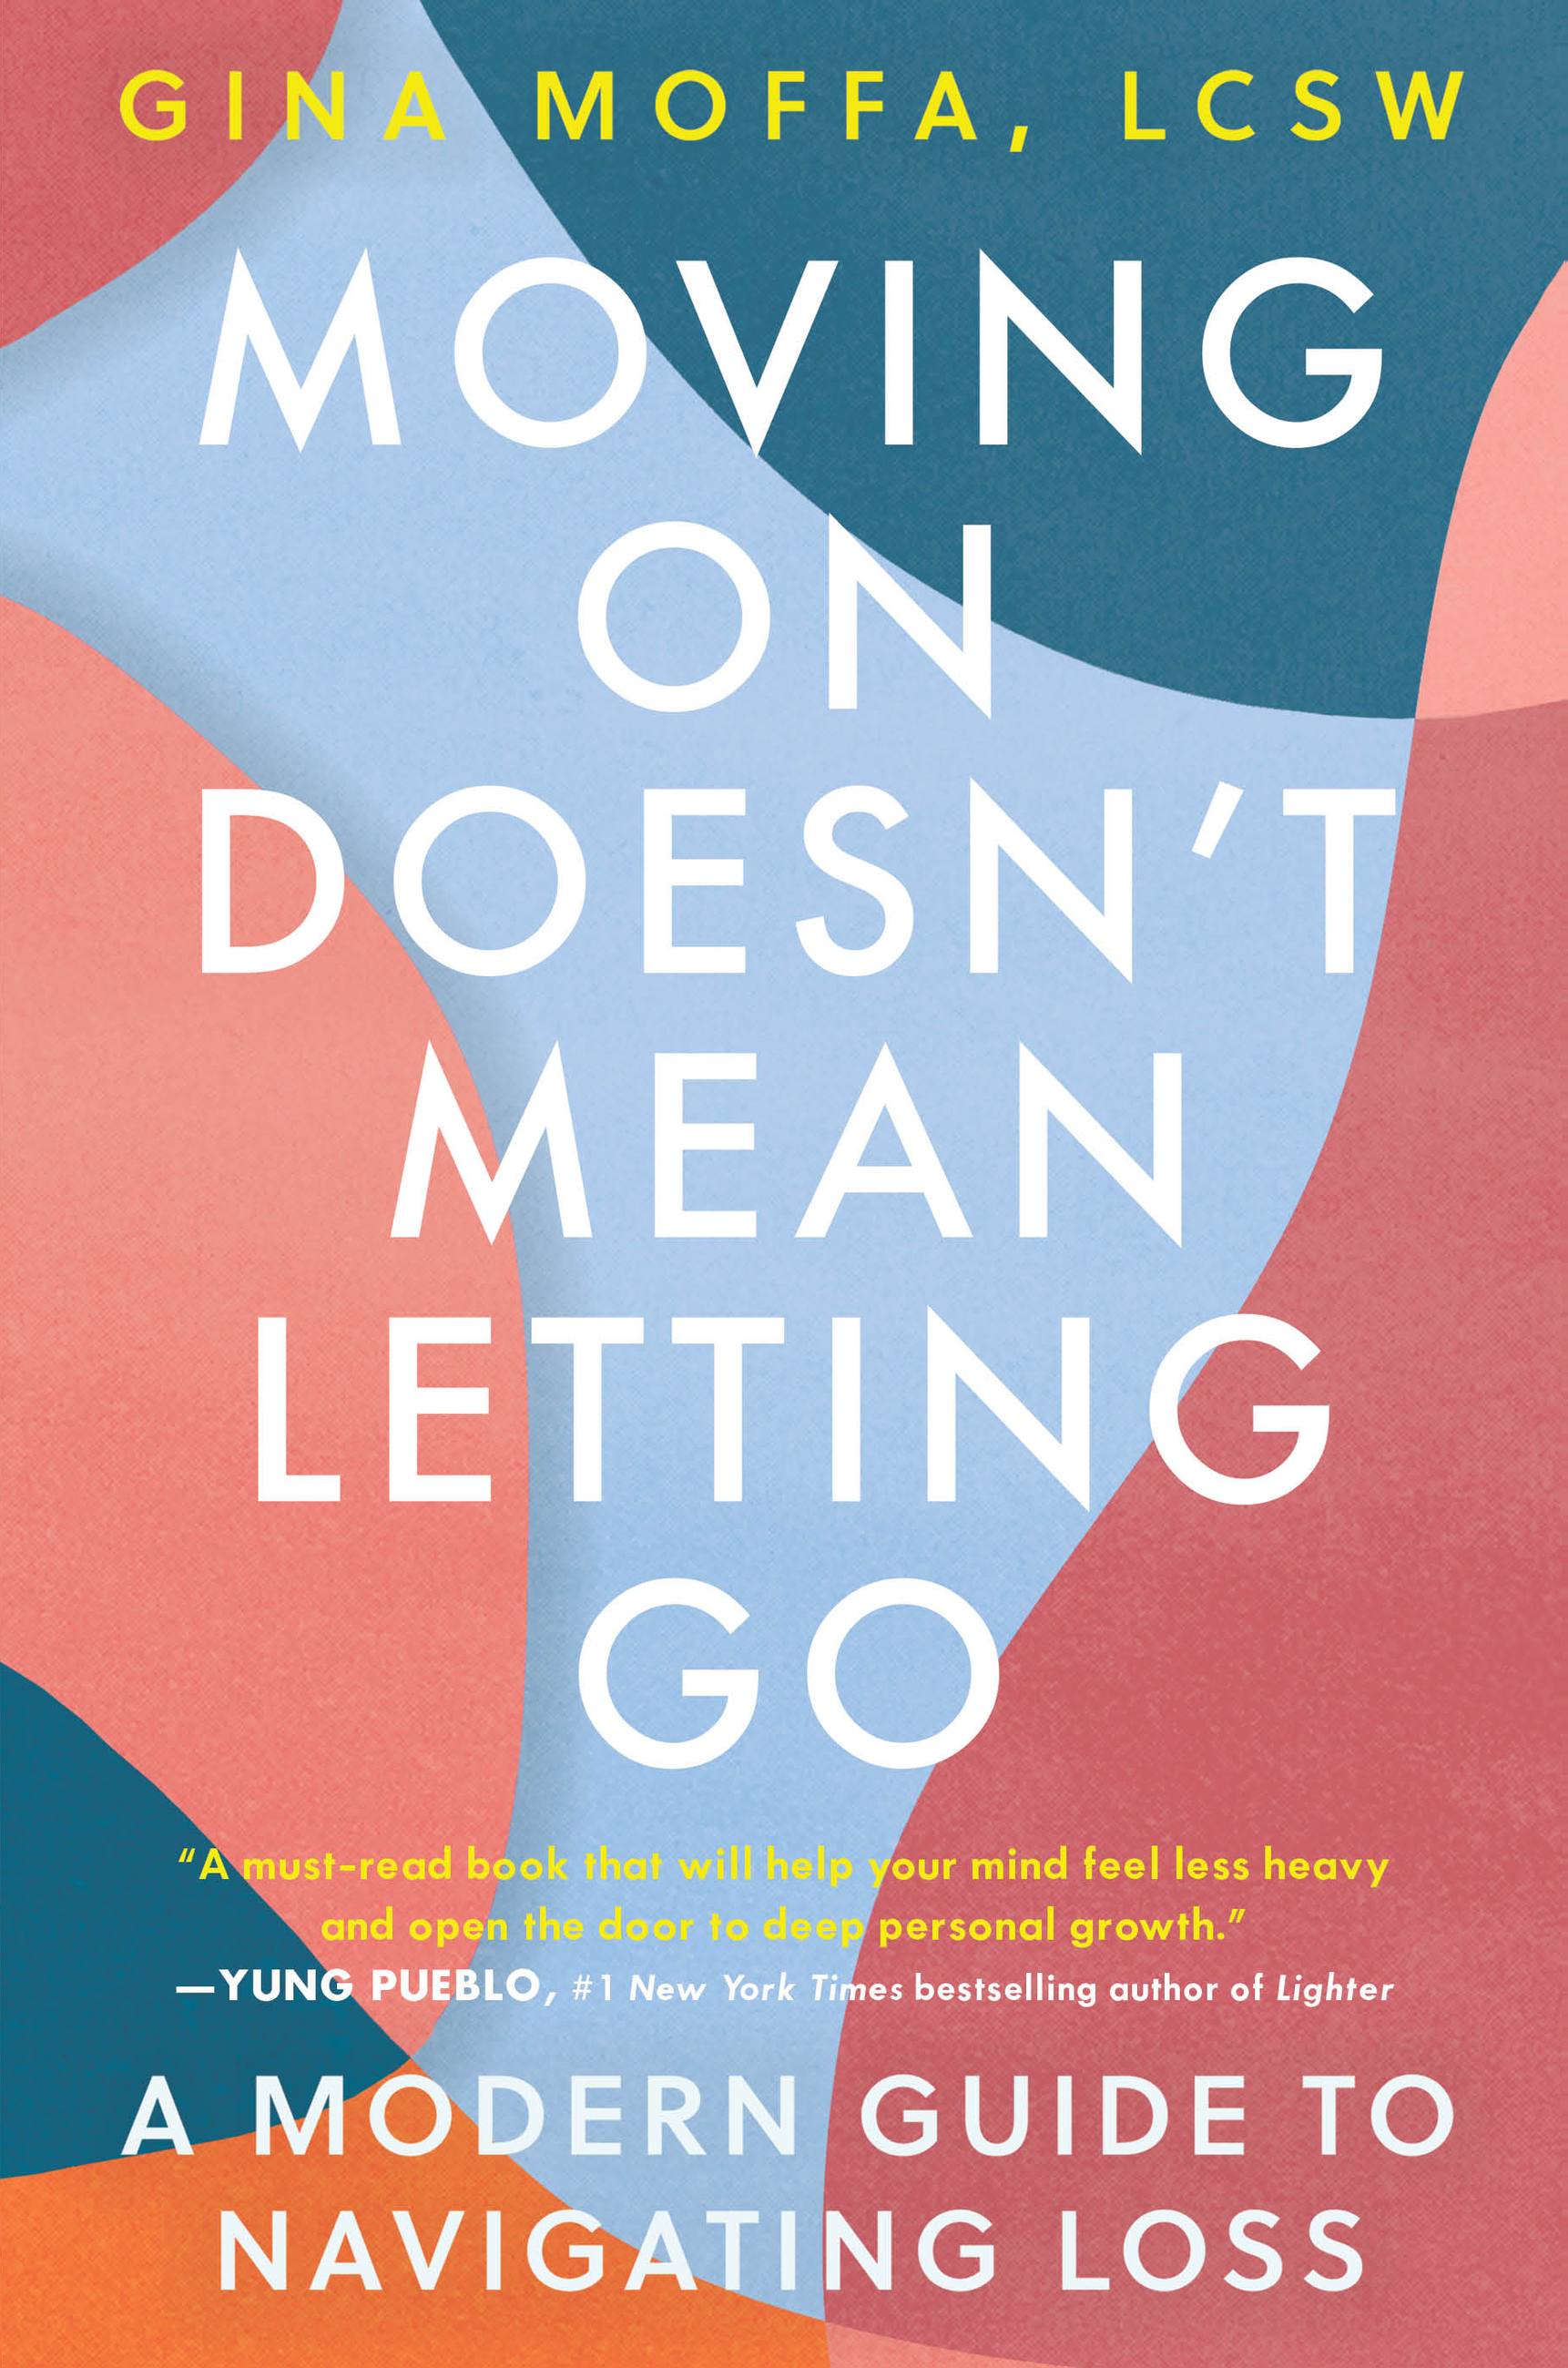 Moving On Doesn't Mean Letting Go by Gina Moffa, LCSW